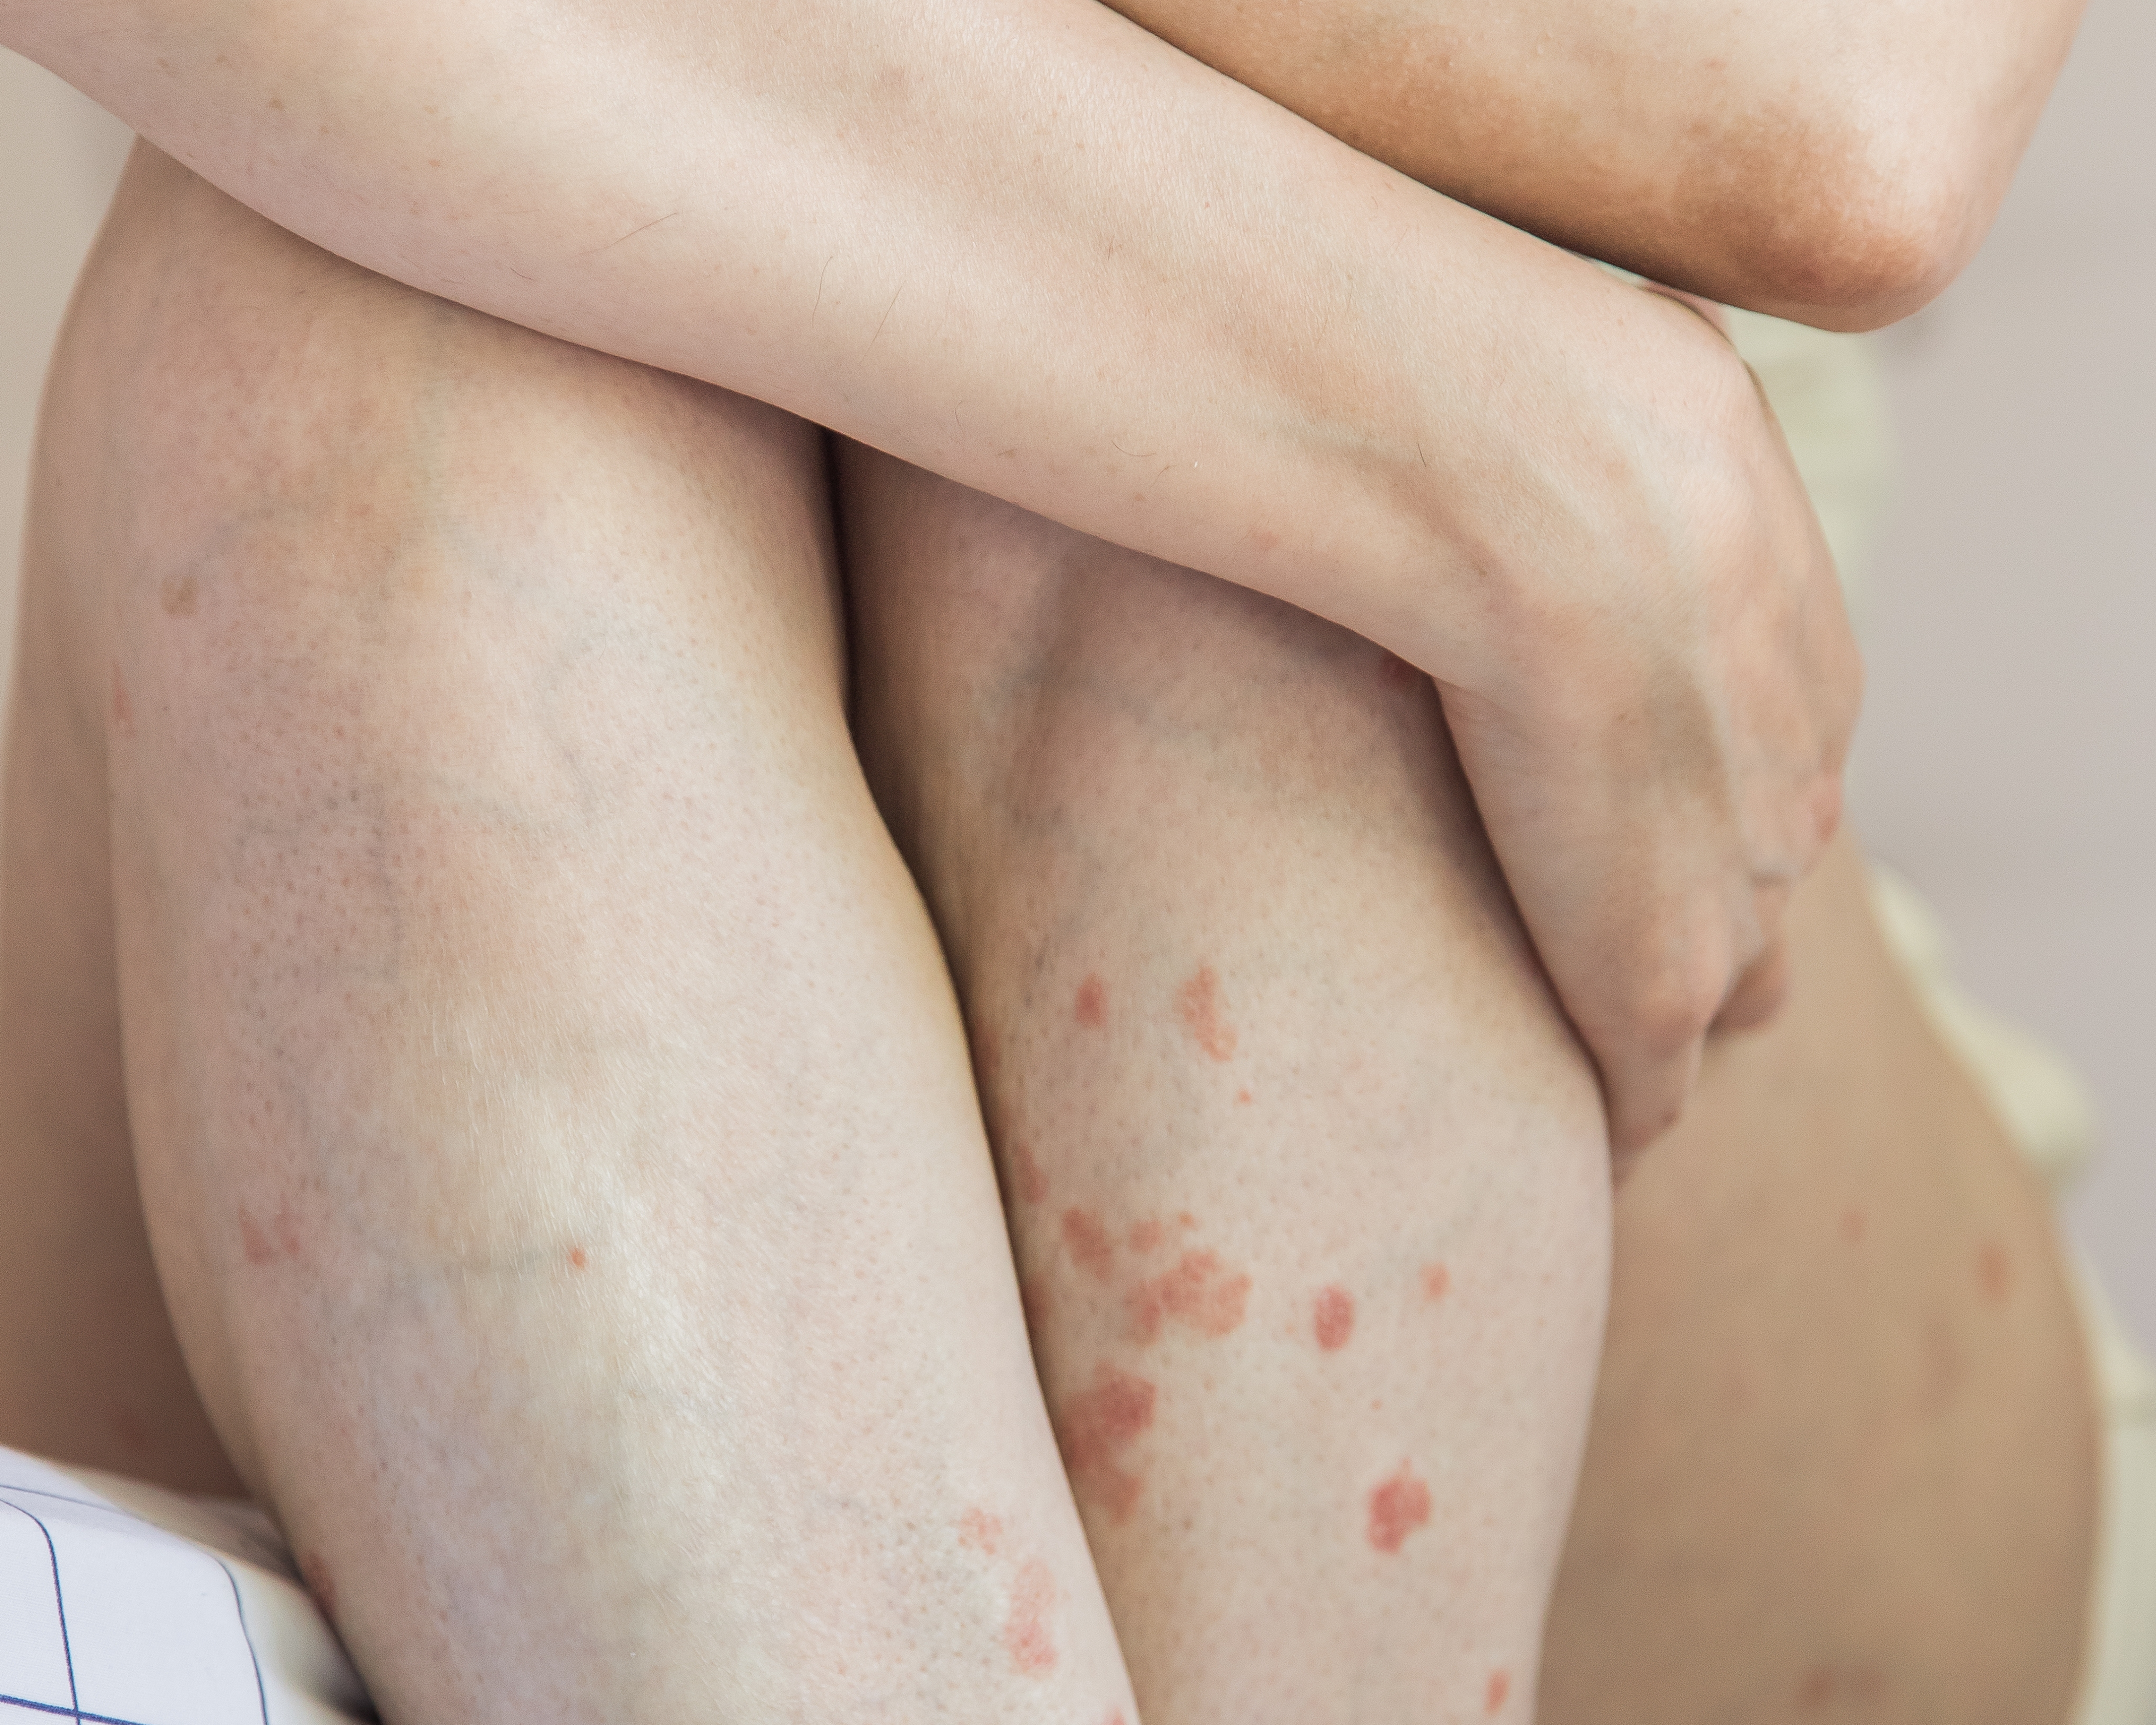 Image of a woman with psoriasis covering legs